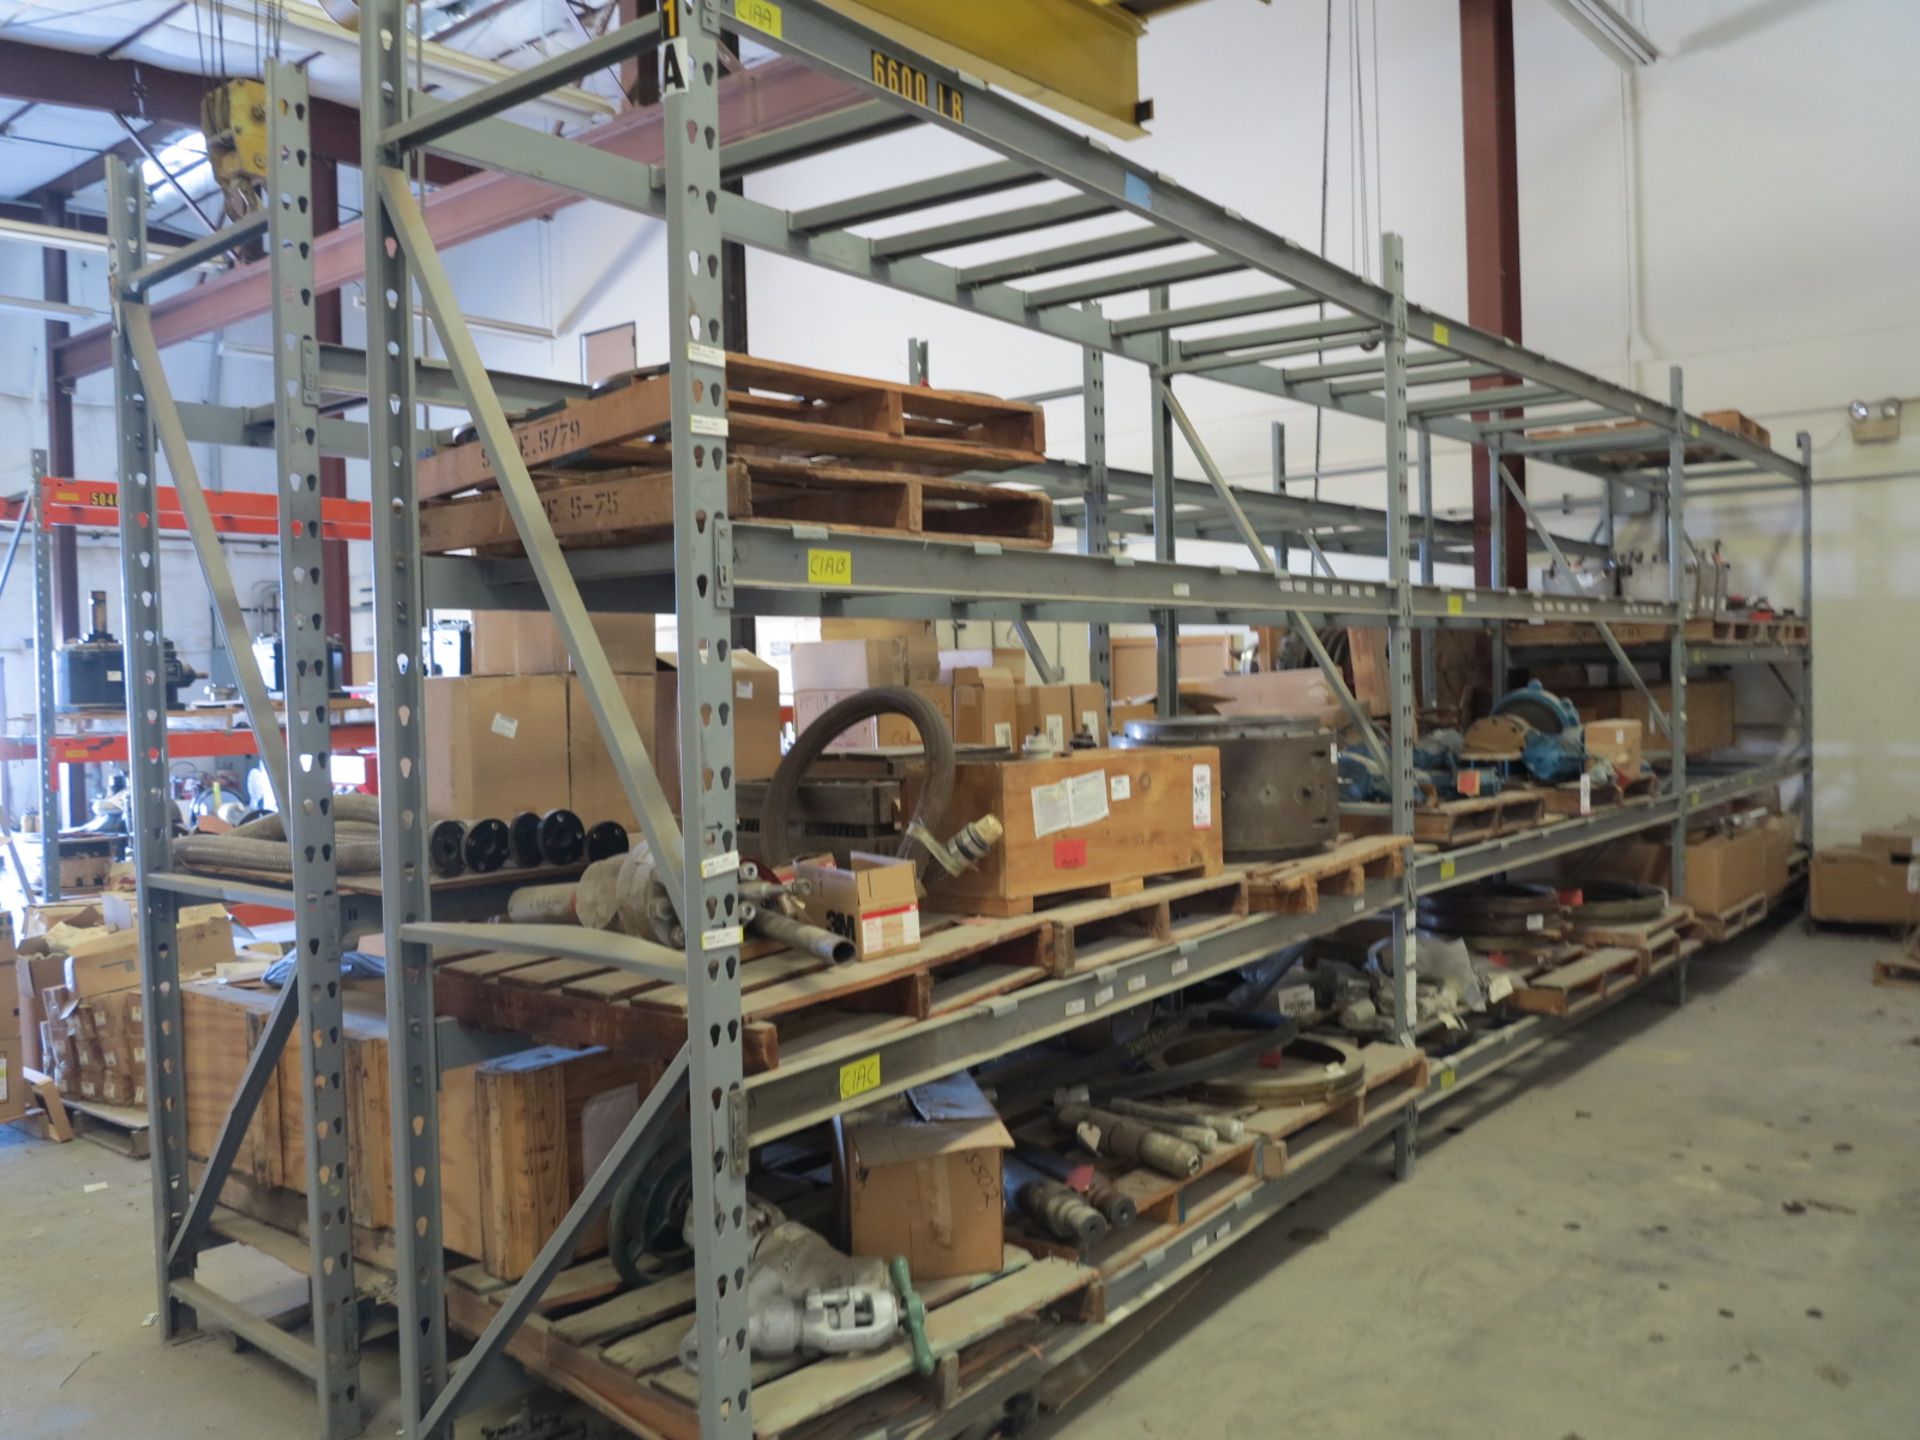 LOT - (6) SECTIONS OF PALLET RACK, 10' BEAMS, 10' UPRIGHTS, CONTENTS NOT INCLUDED - Image 2 of 2